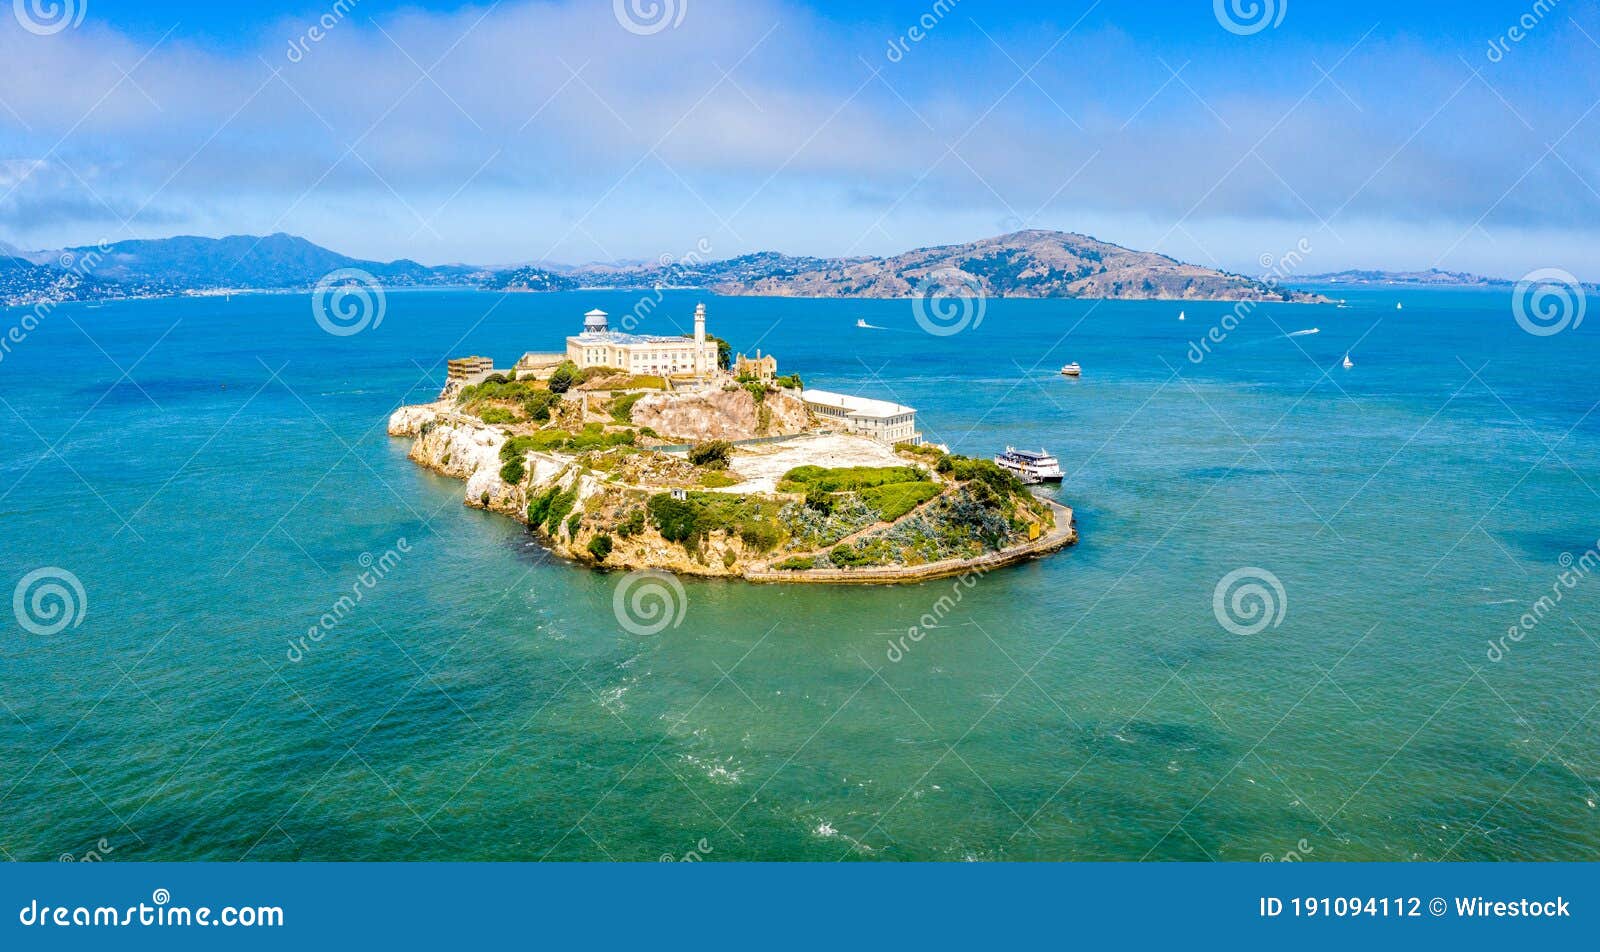 An aerial view of the Alcatraz Island in San Francisco on a bright day